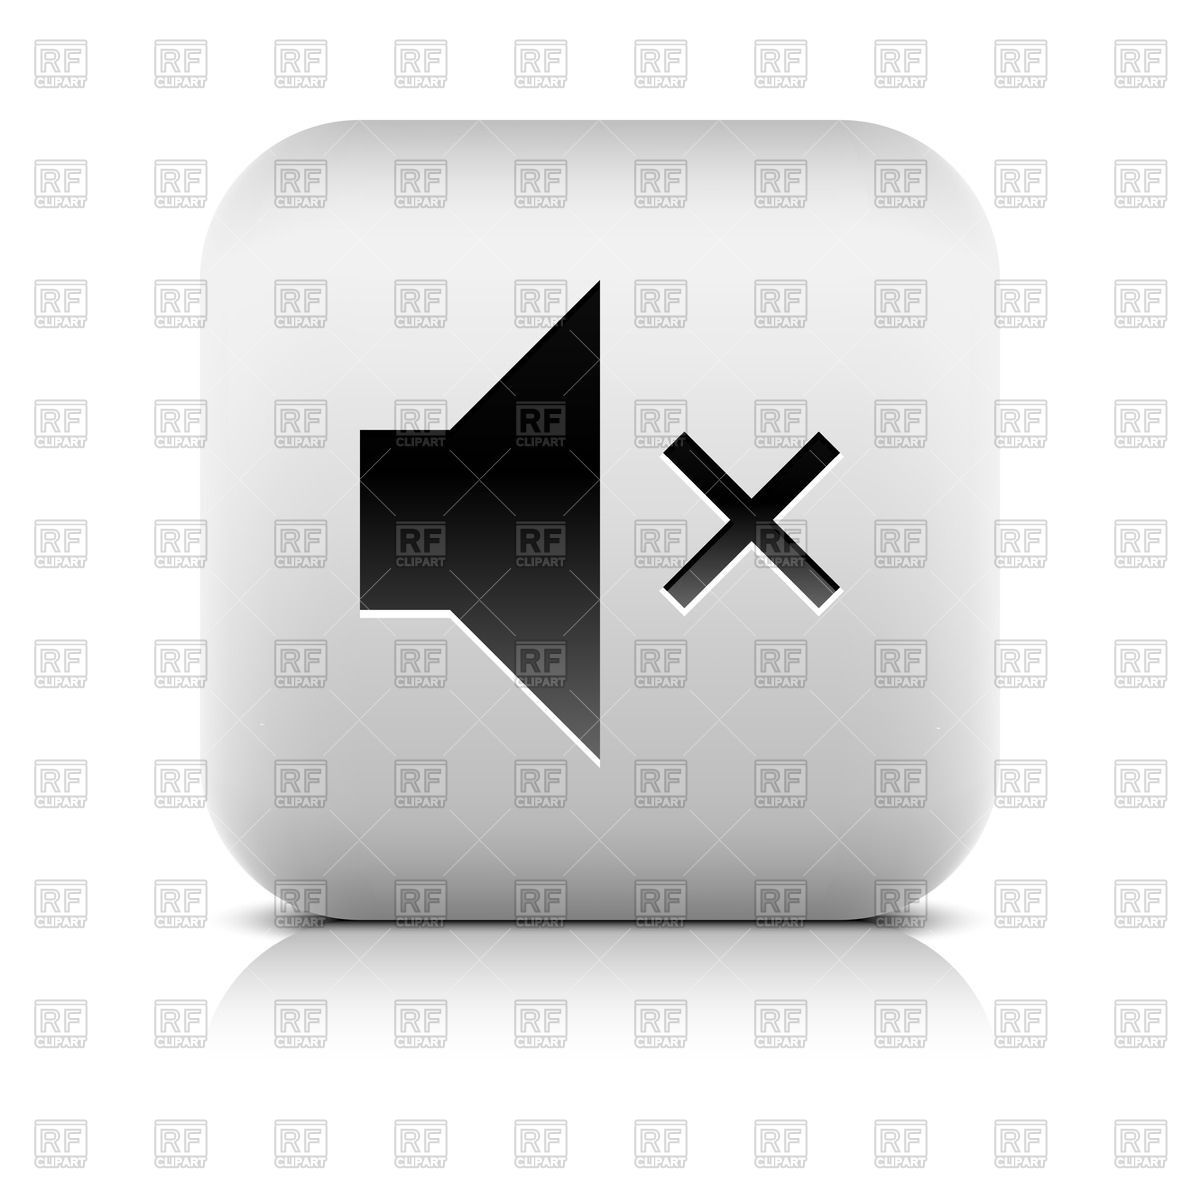 Mute   Gray Volume Button Download Royalty Free Vector Clipart  Eps